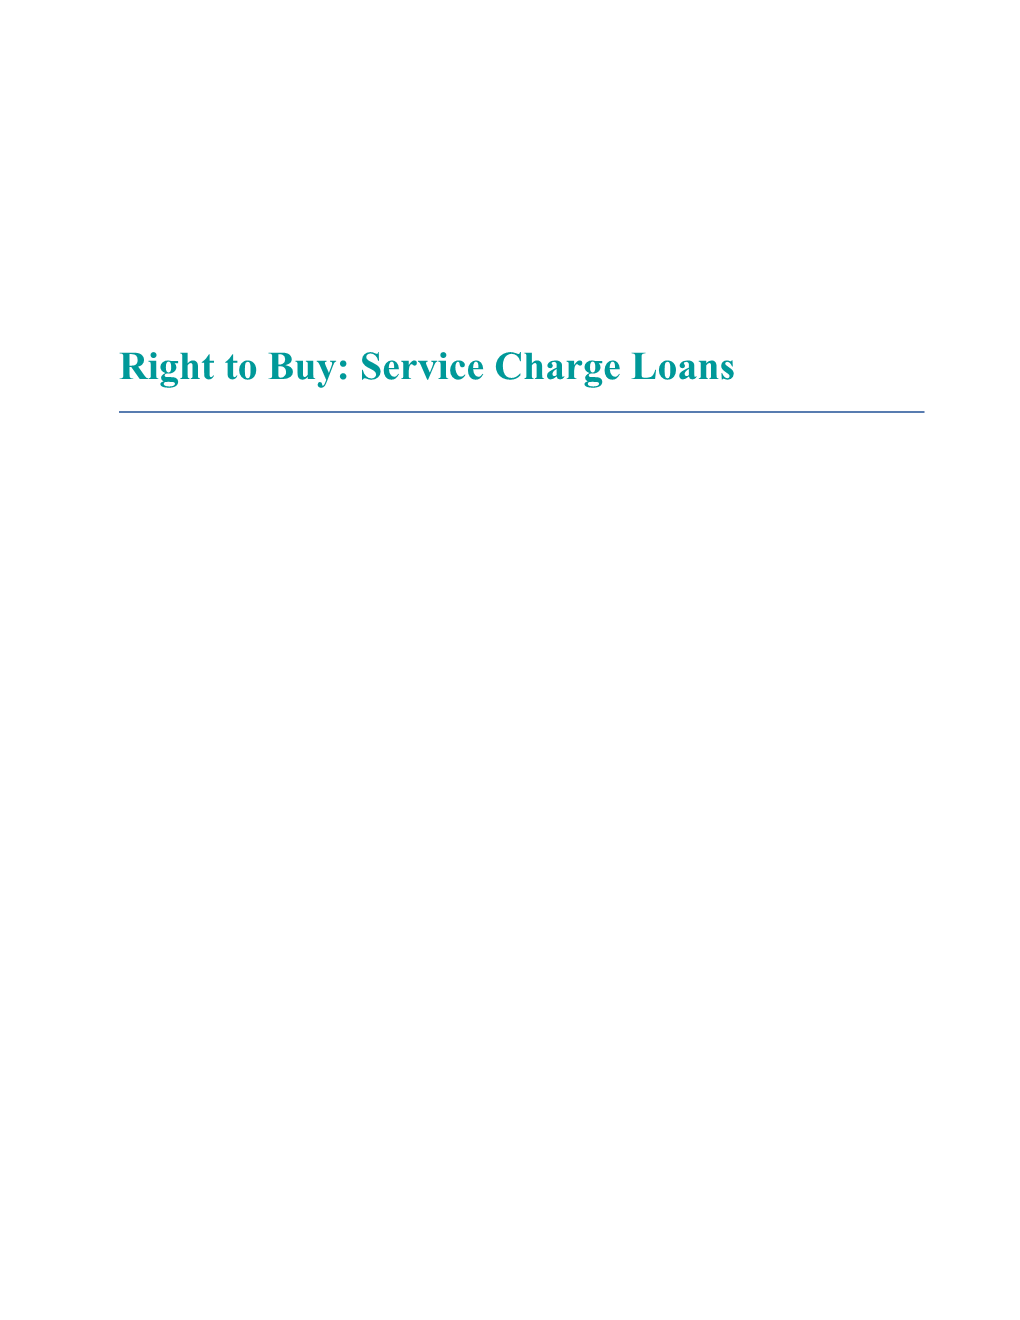 Right to Buy: Service Charge Loans